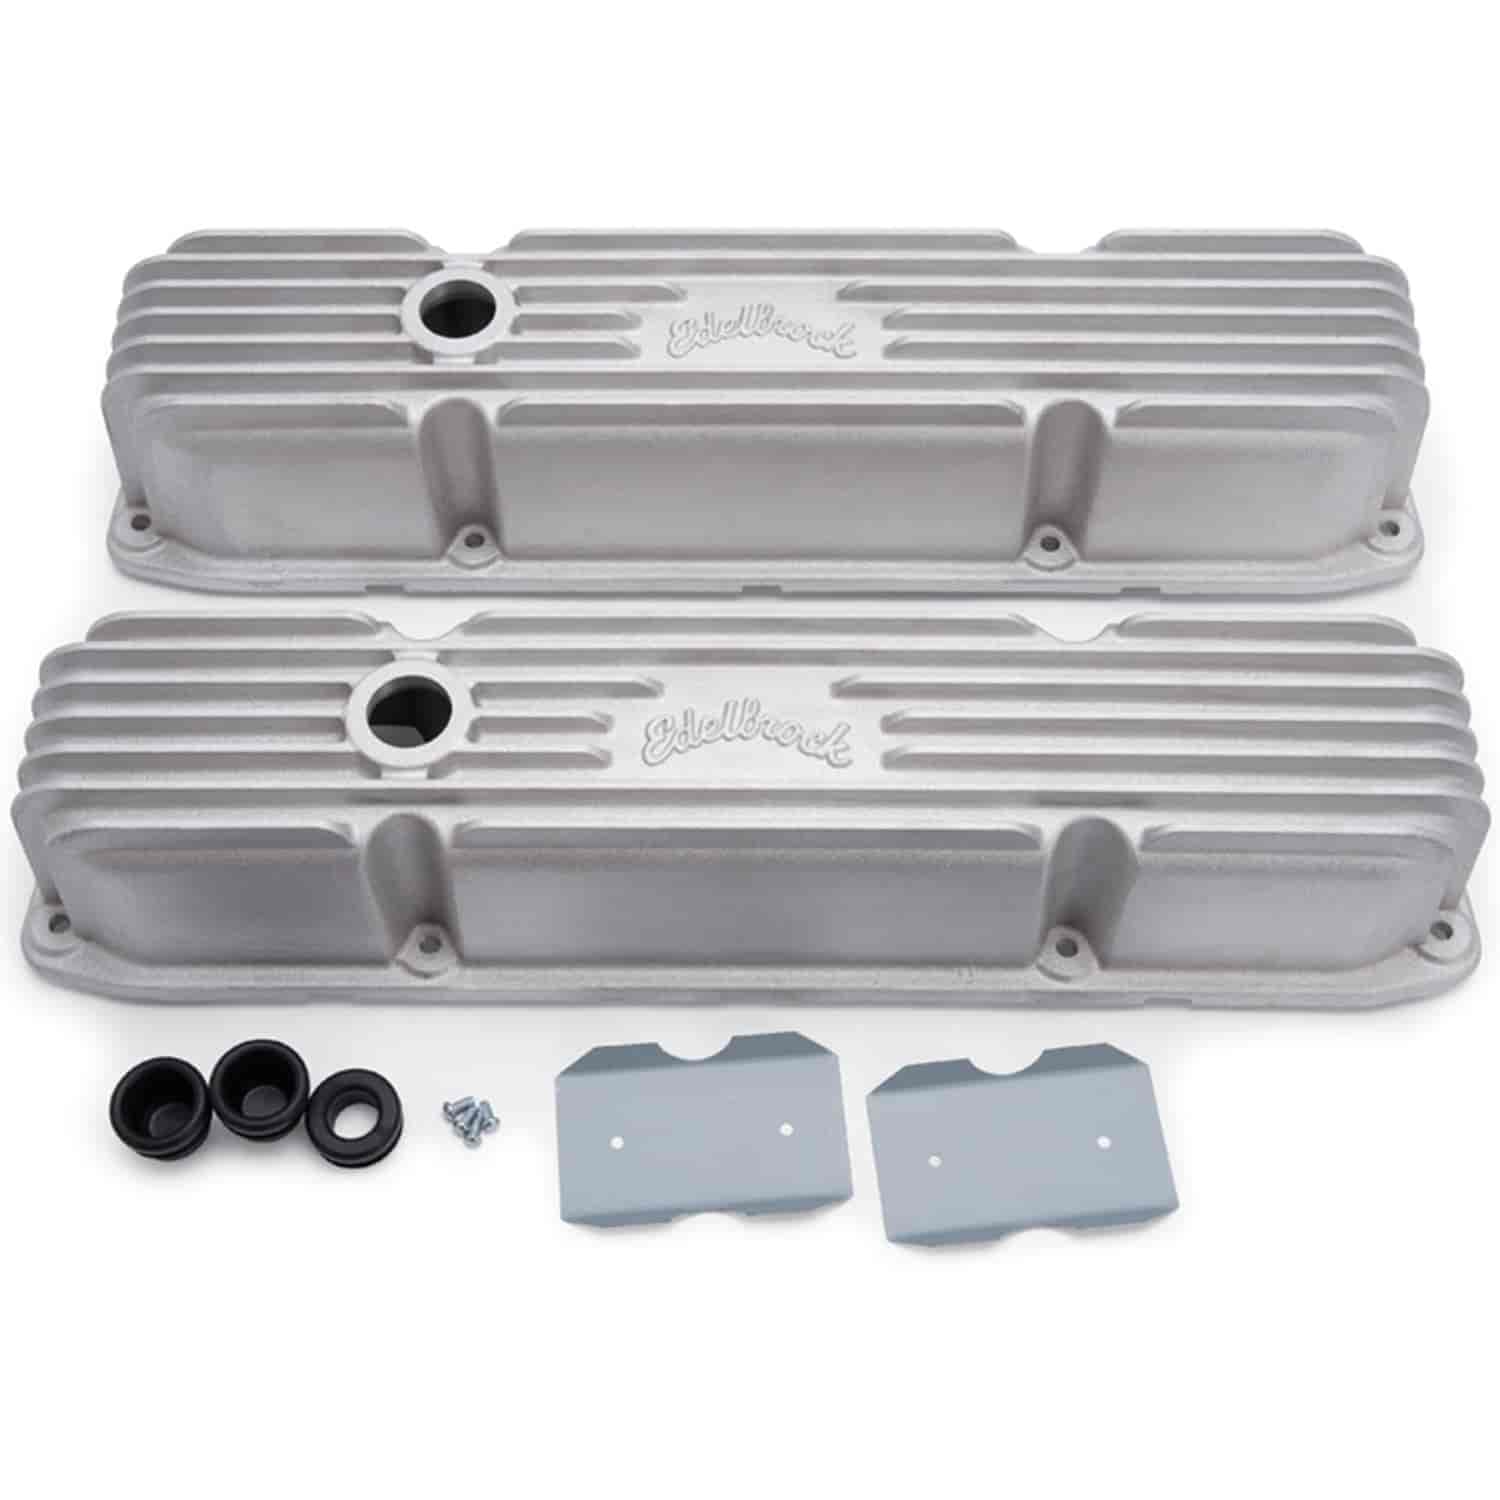 Classic Finned Valve Covers for Big Block Chrysler 383-440 with Satin Finish